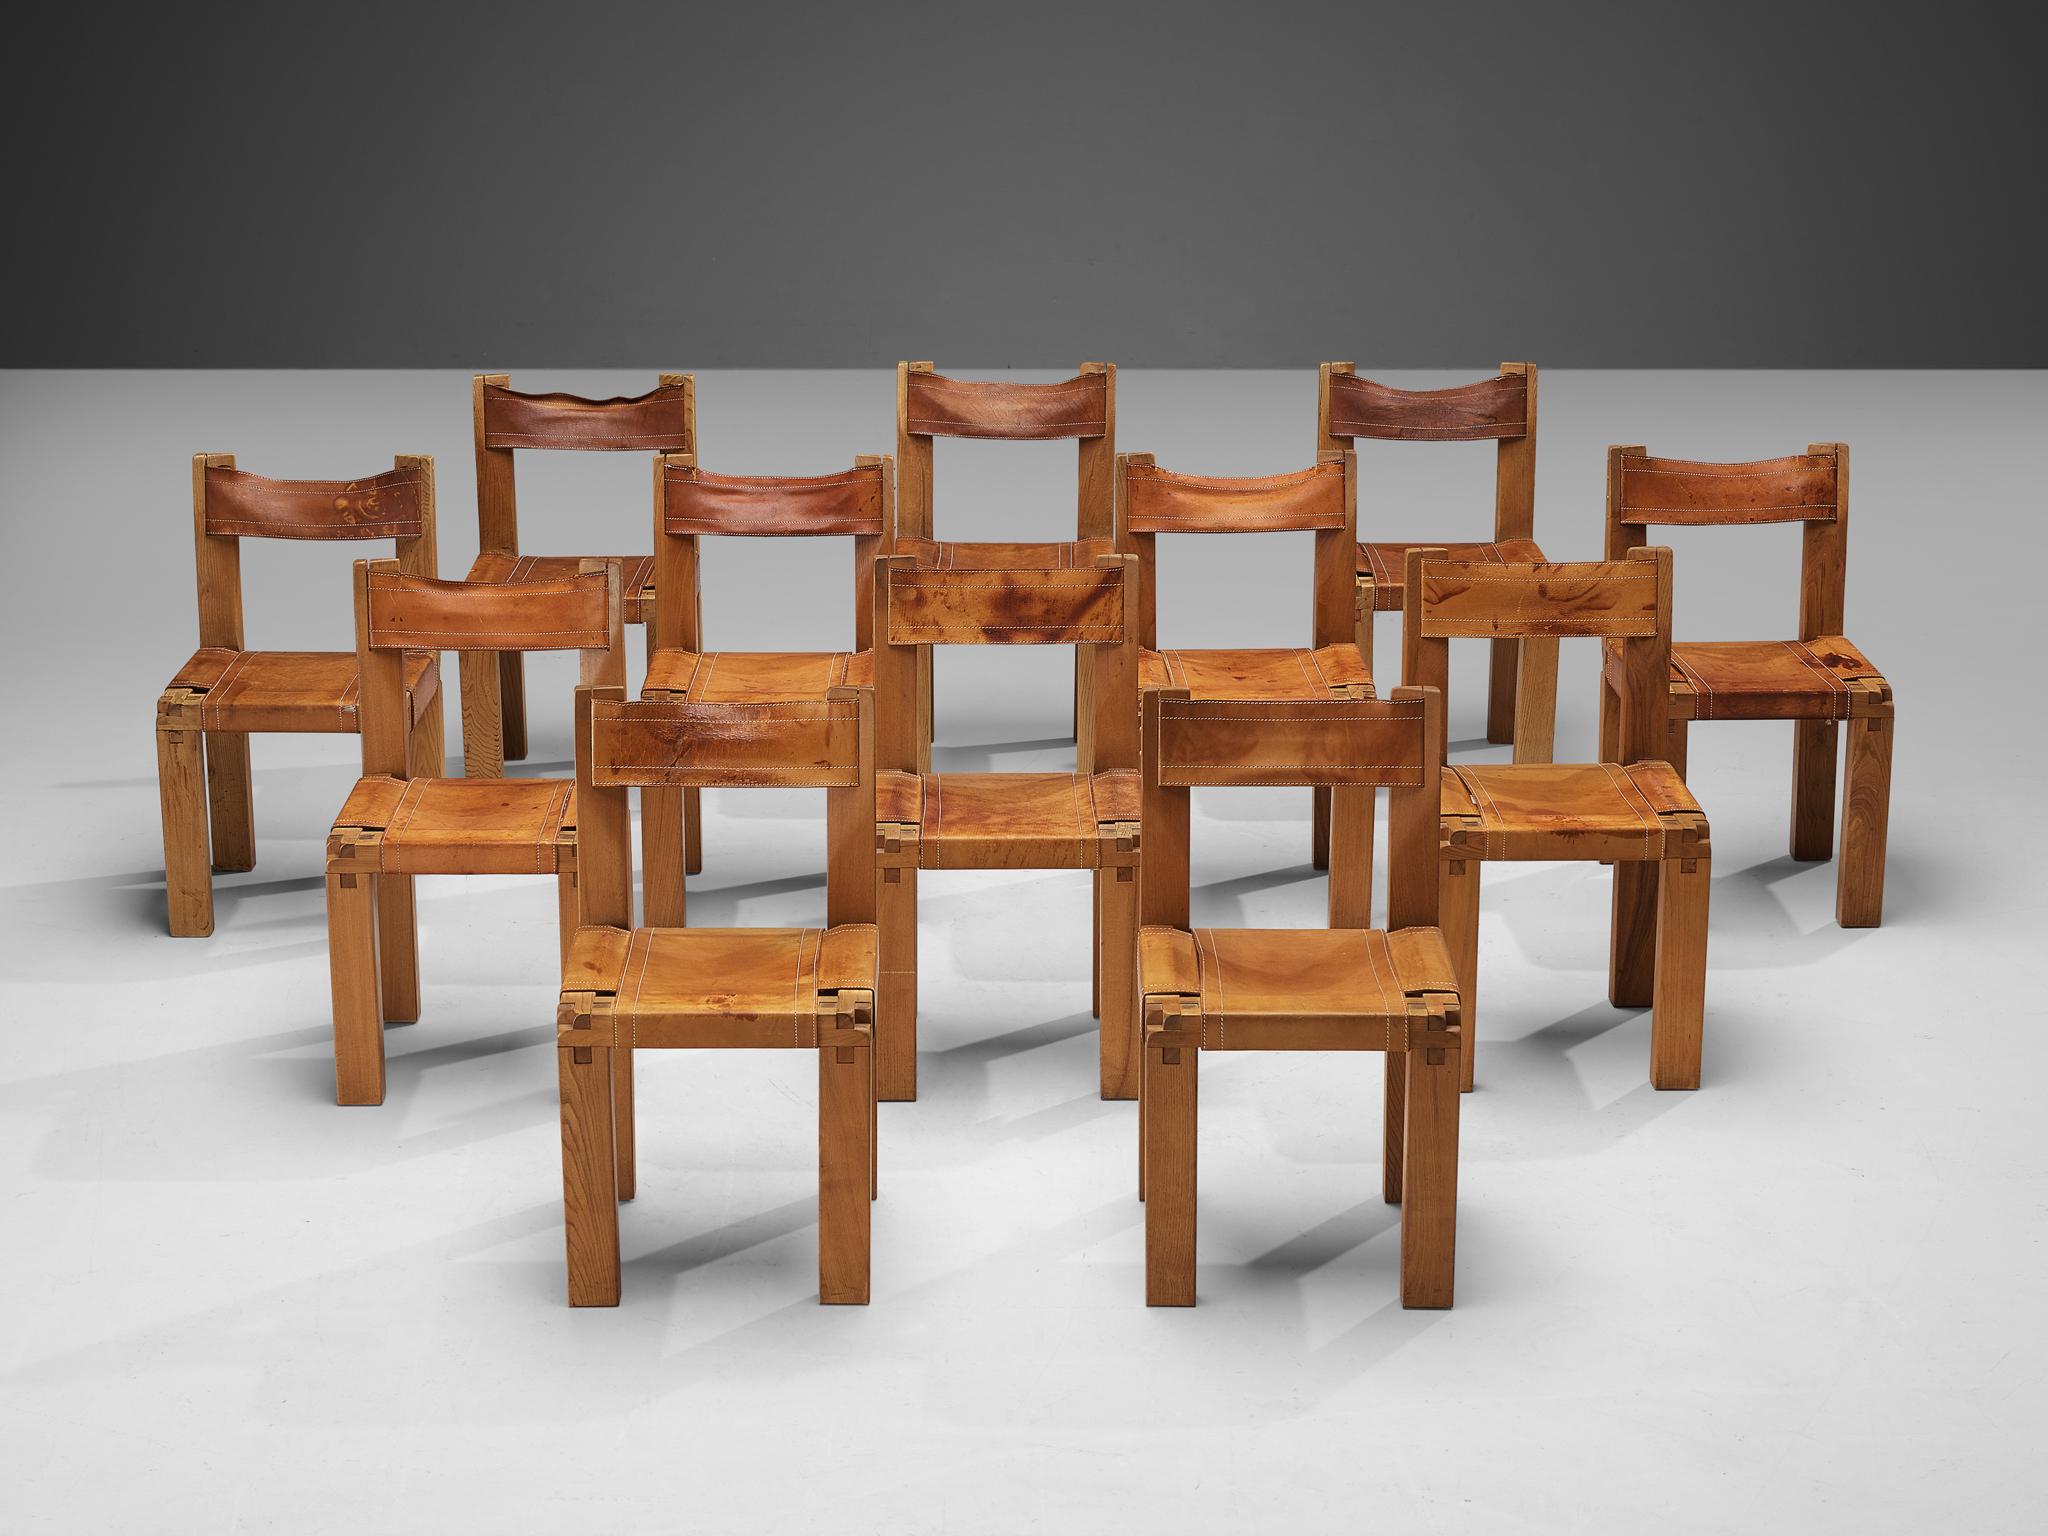 Pierre Chapo, dining chairs model 'S11', elm, leather, France, circa 1966.

A set of twelve chairs in solid elmwood with cognac leather seating and back, designed by French designer Pierre Chapo. These chairs have a cubic design of solid elmwood